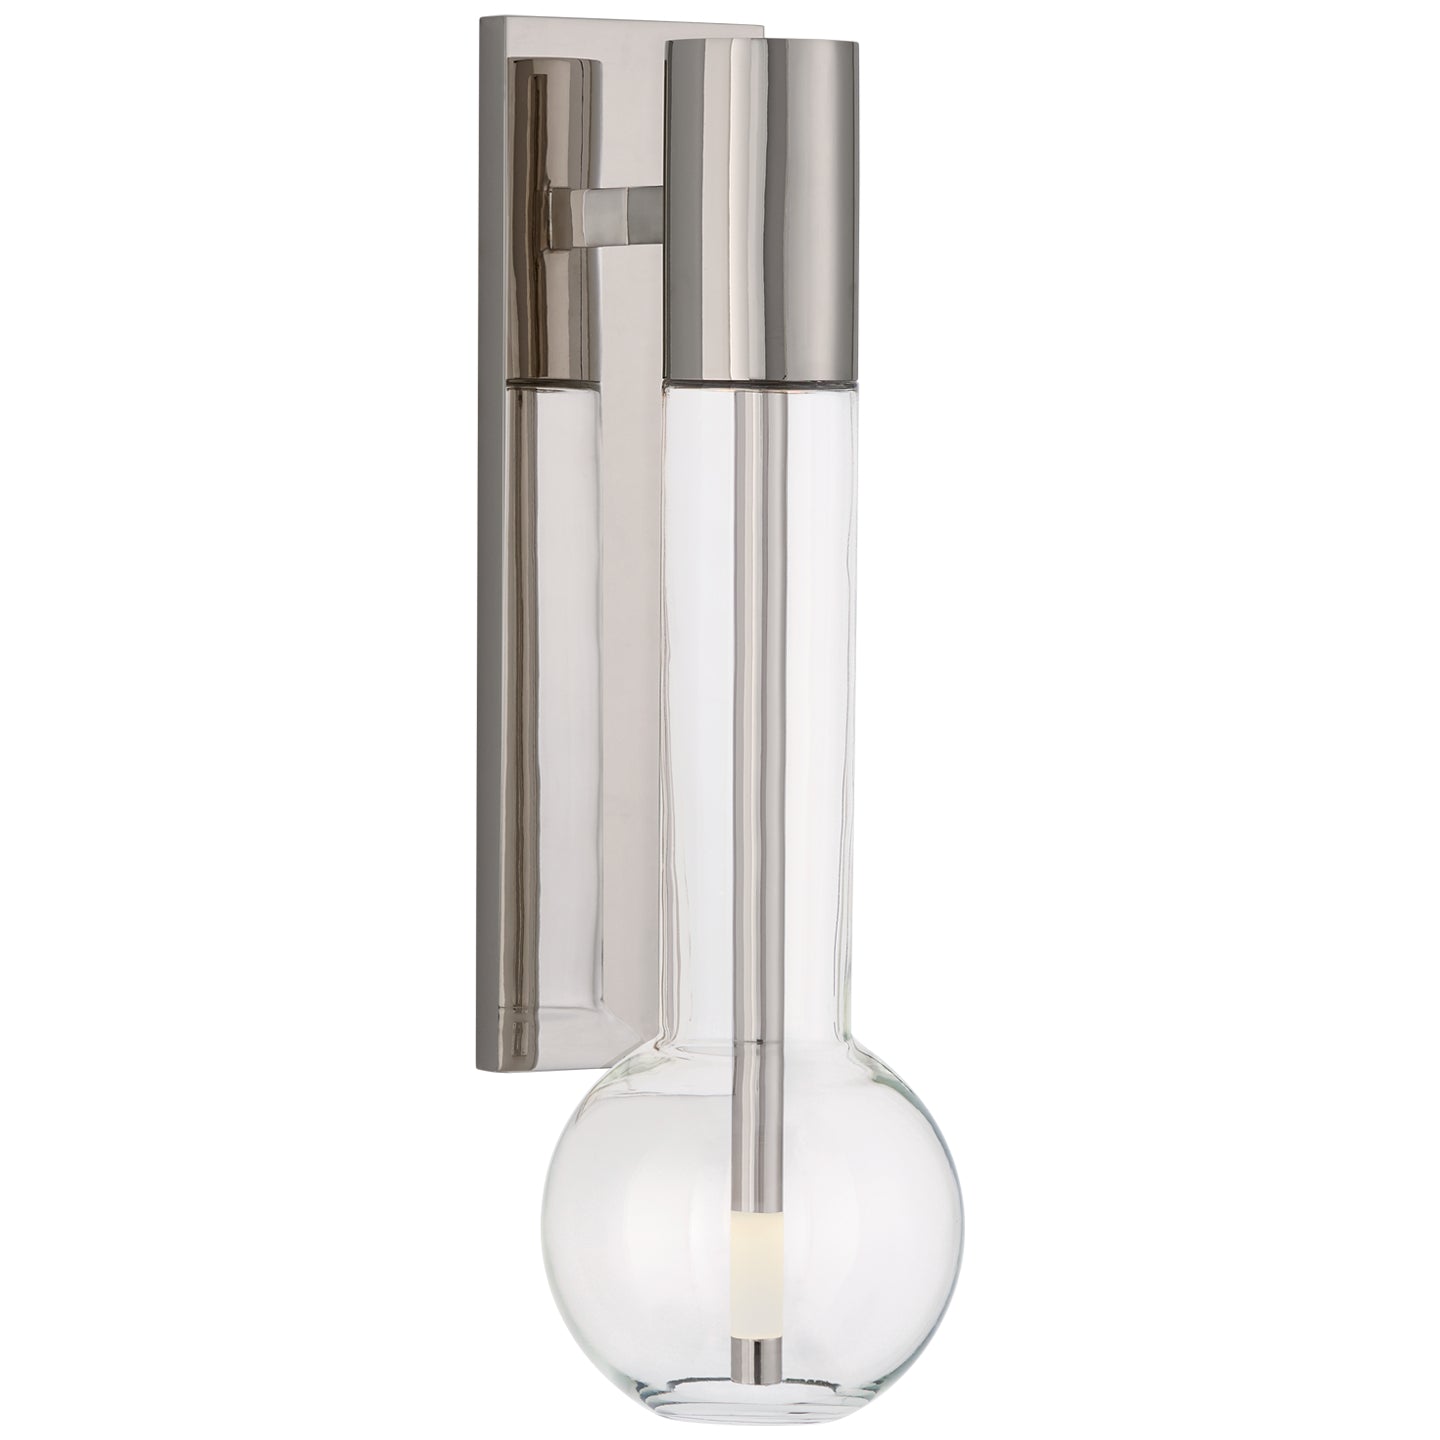 Load image into Gallery viewer, Visual Comfort Signature - KW 2130PN - LED Wall Sconce - Nye - Polished Nickel
